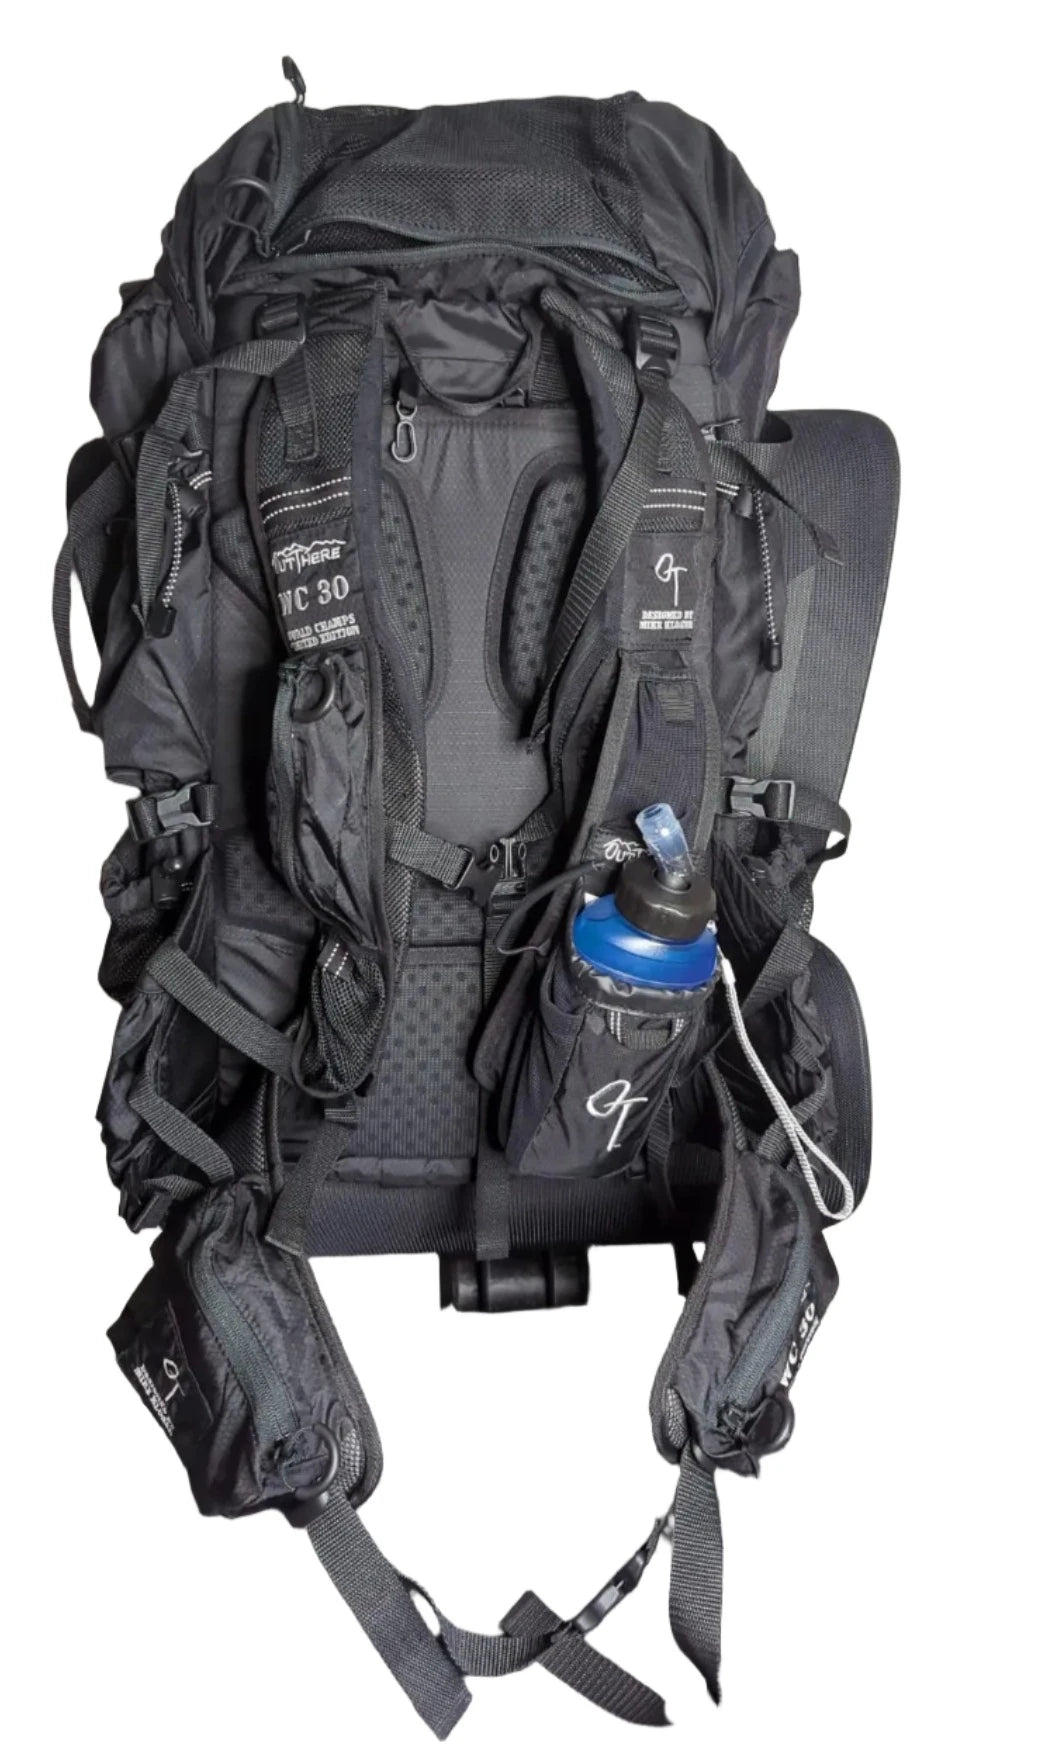 Extra water bottle slot for your backpack